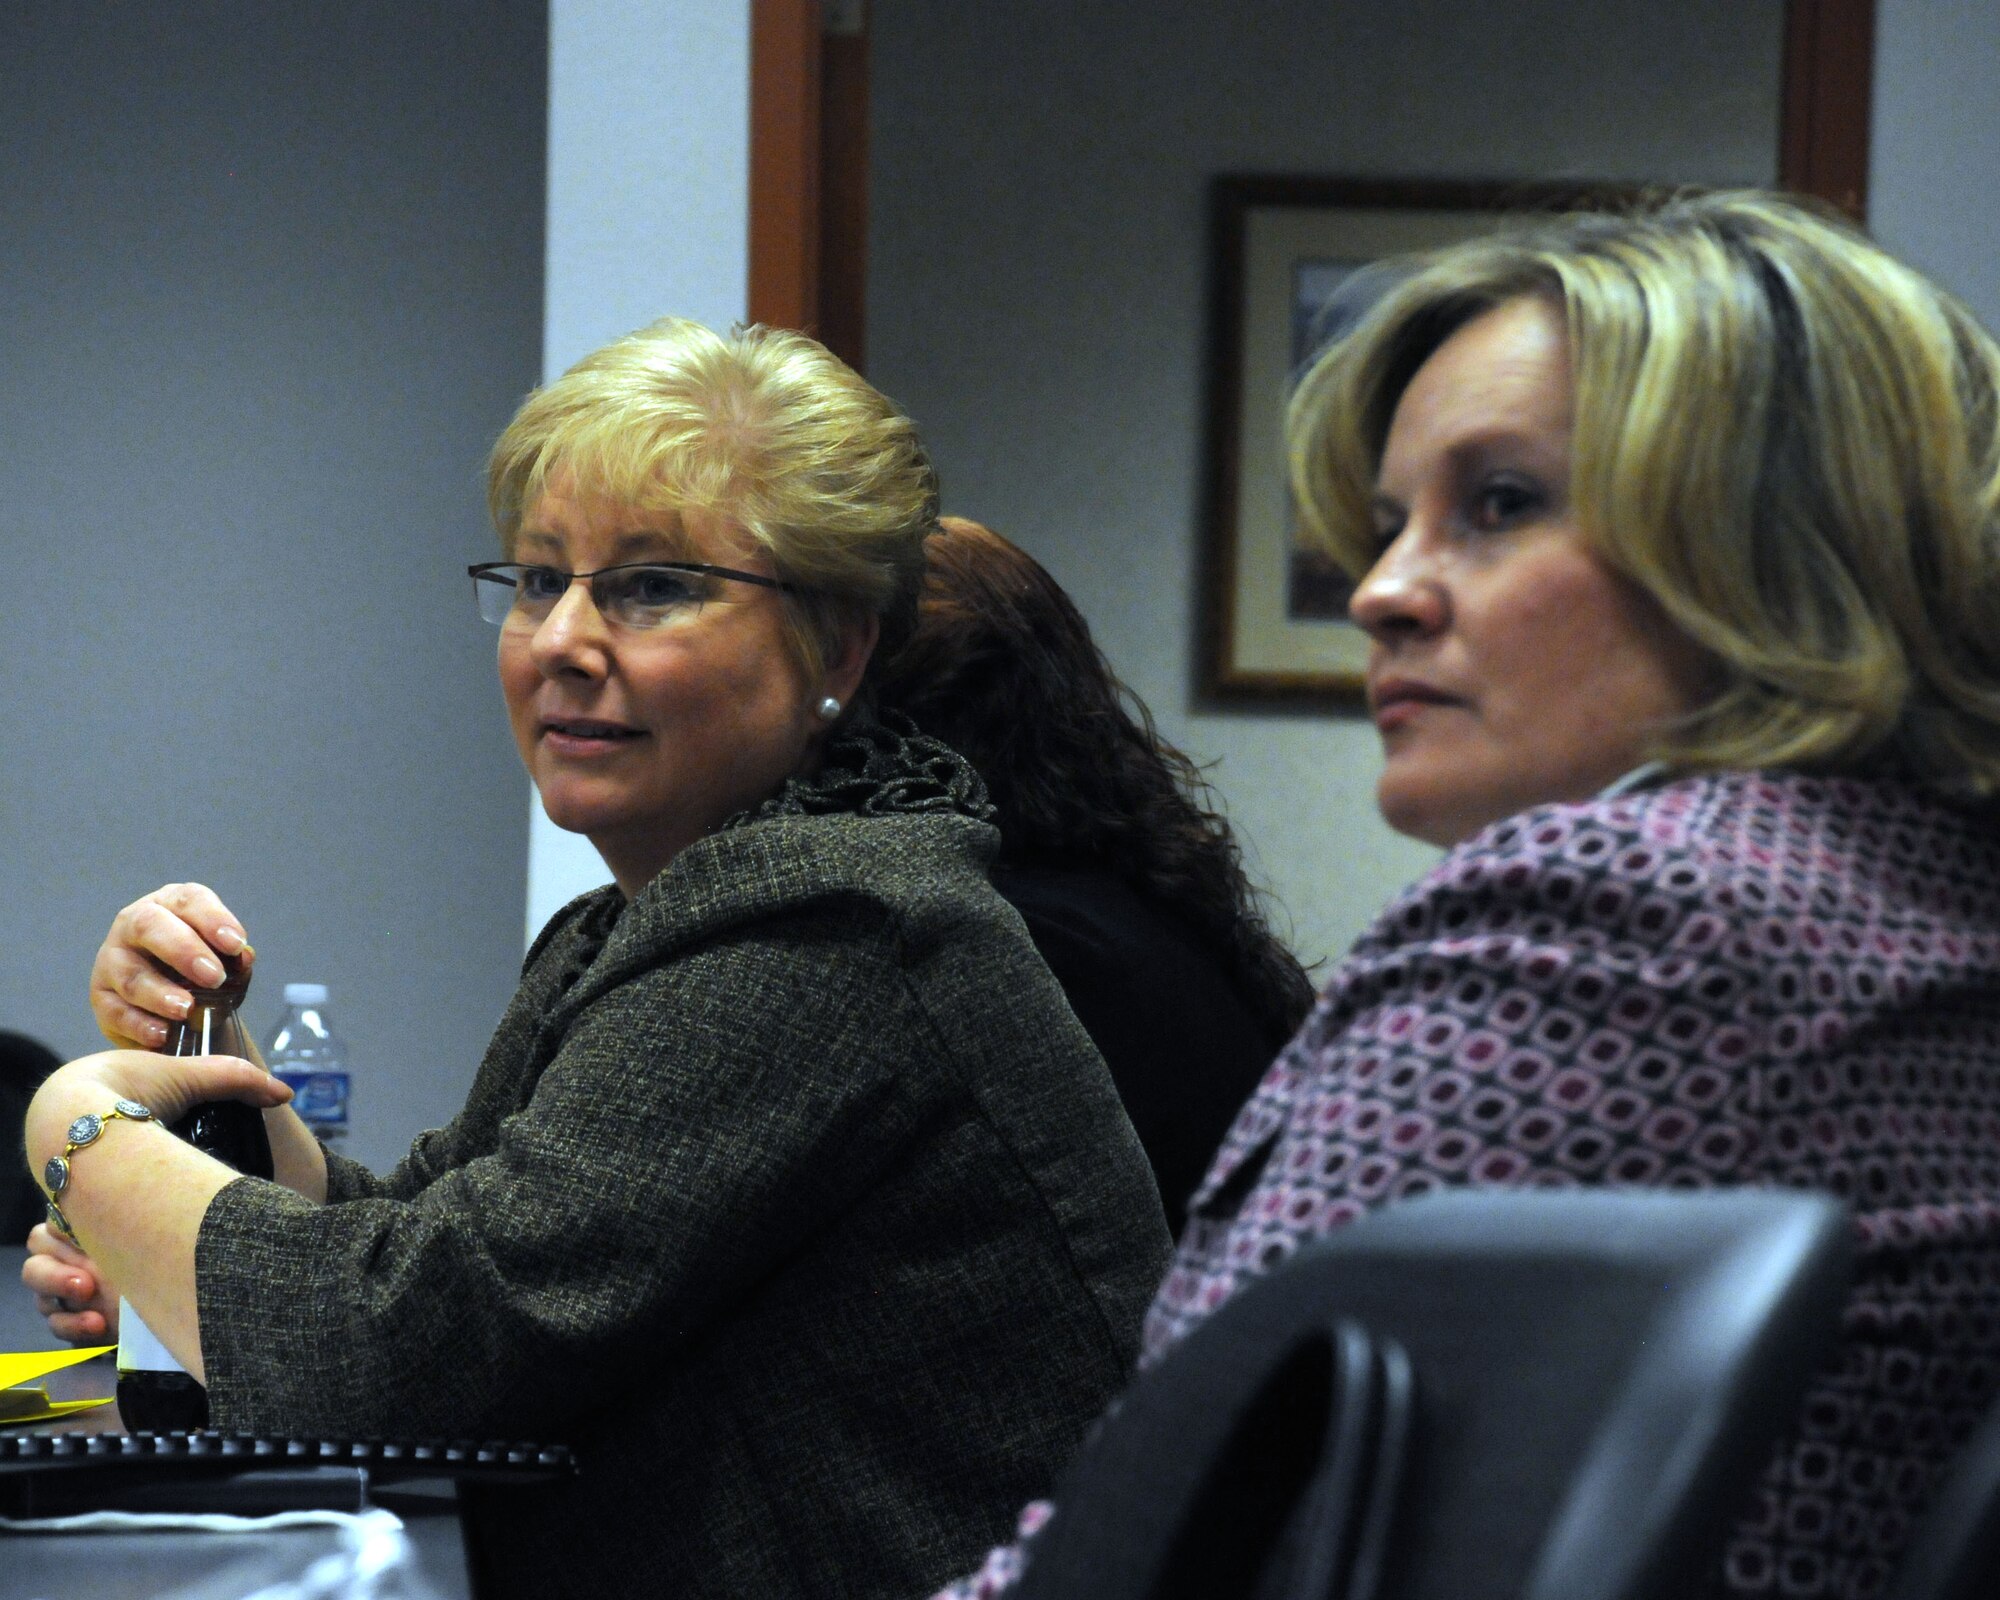 Paula Roy (left), wife of Chief Master Sergeant of the Air Force James Roy, and Julie Tims, wife of Col. Gregory Tims, the 90th Missile Wing commander, listen to a briefing March 3, 2011, at the Airmen and Family Readiness Center at F. E. Warren Air Force Base, Wyo. (U.S. Air Force photo/R.J. Oriez)